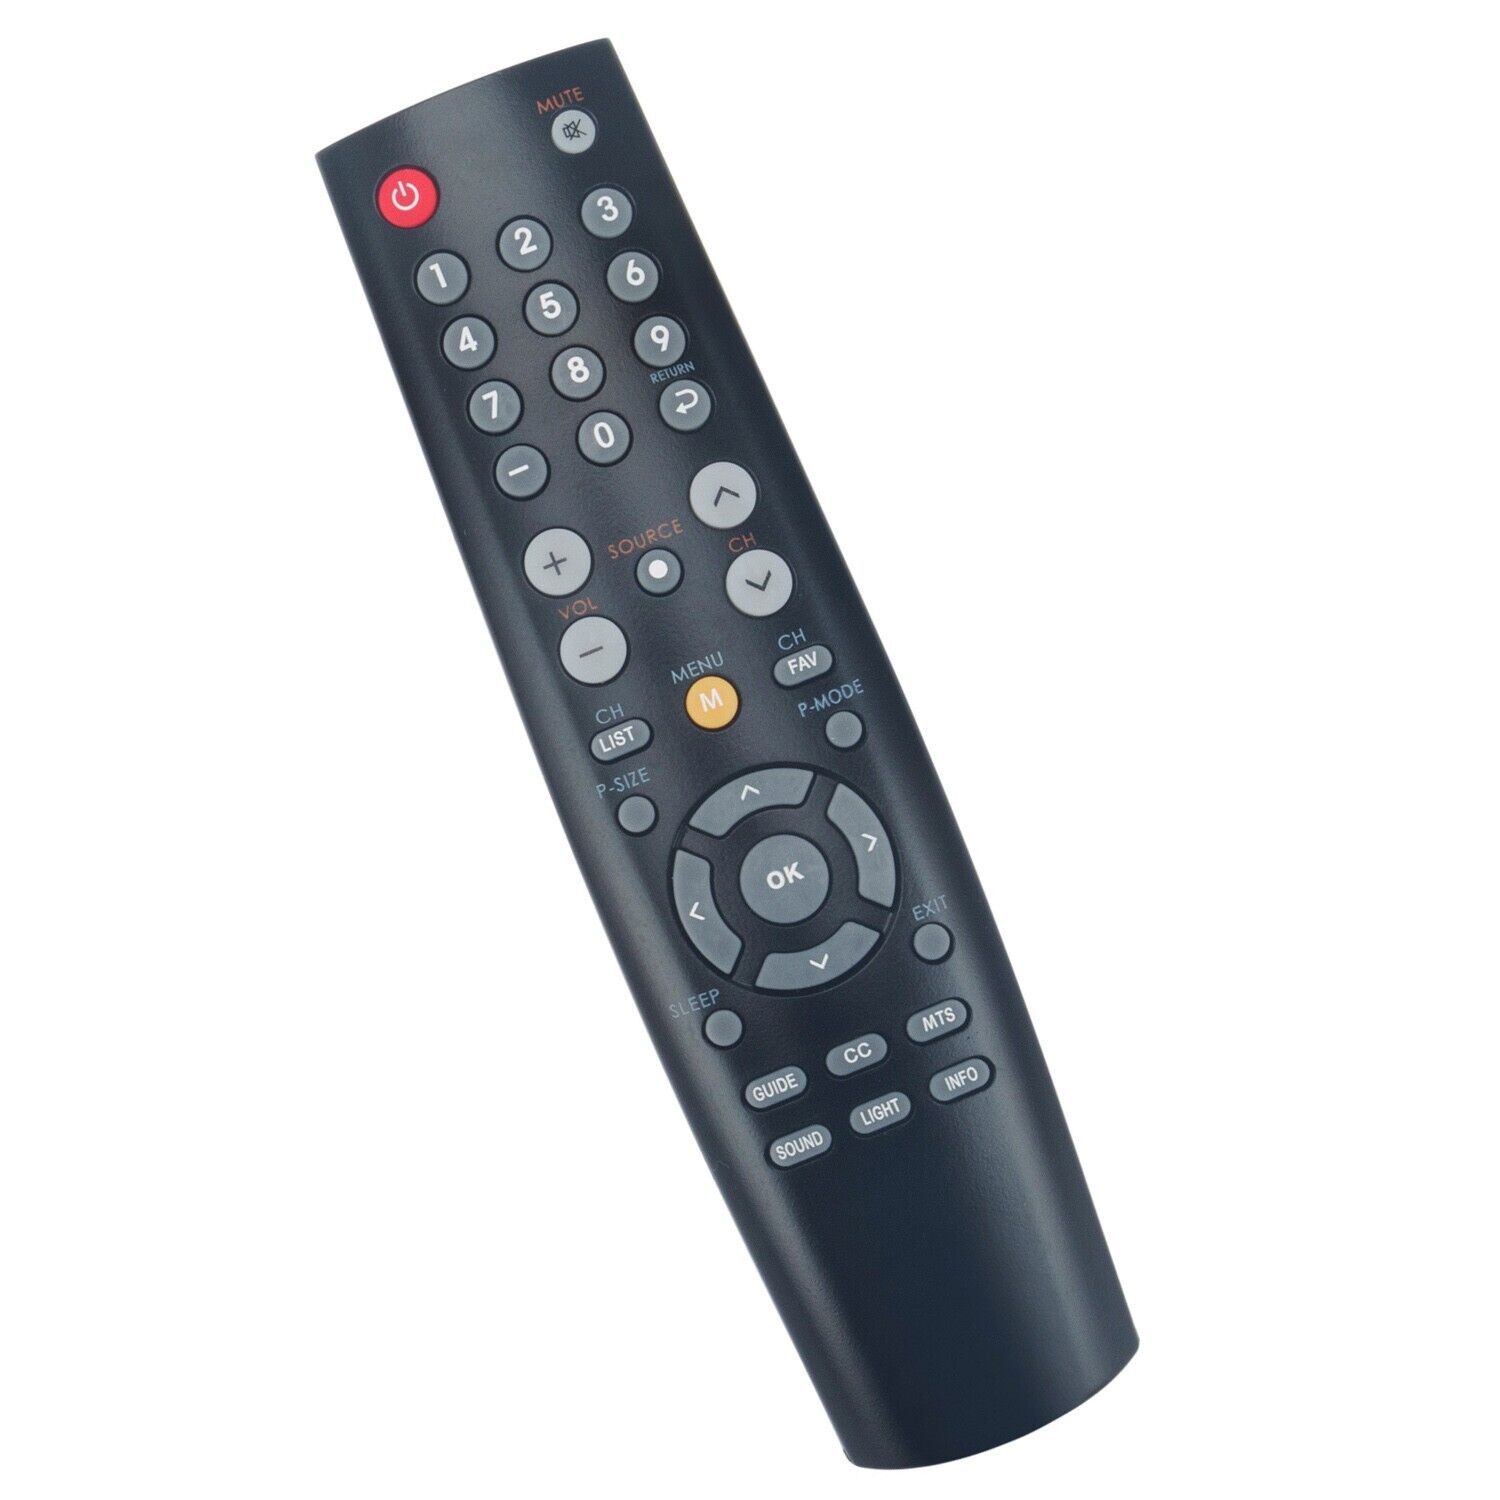 thinkstar New Replaced Remote Control For Coby Tv Ledtv3217